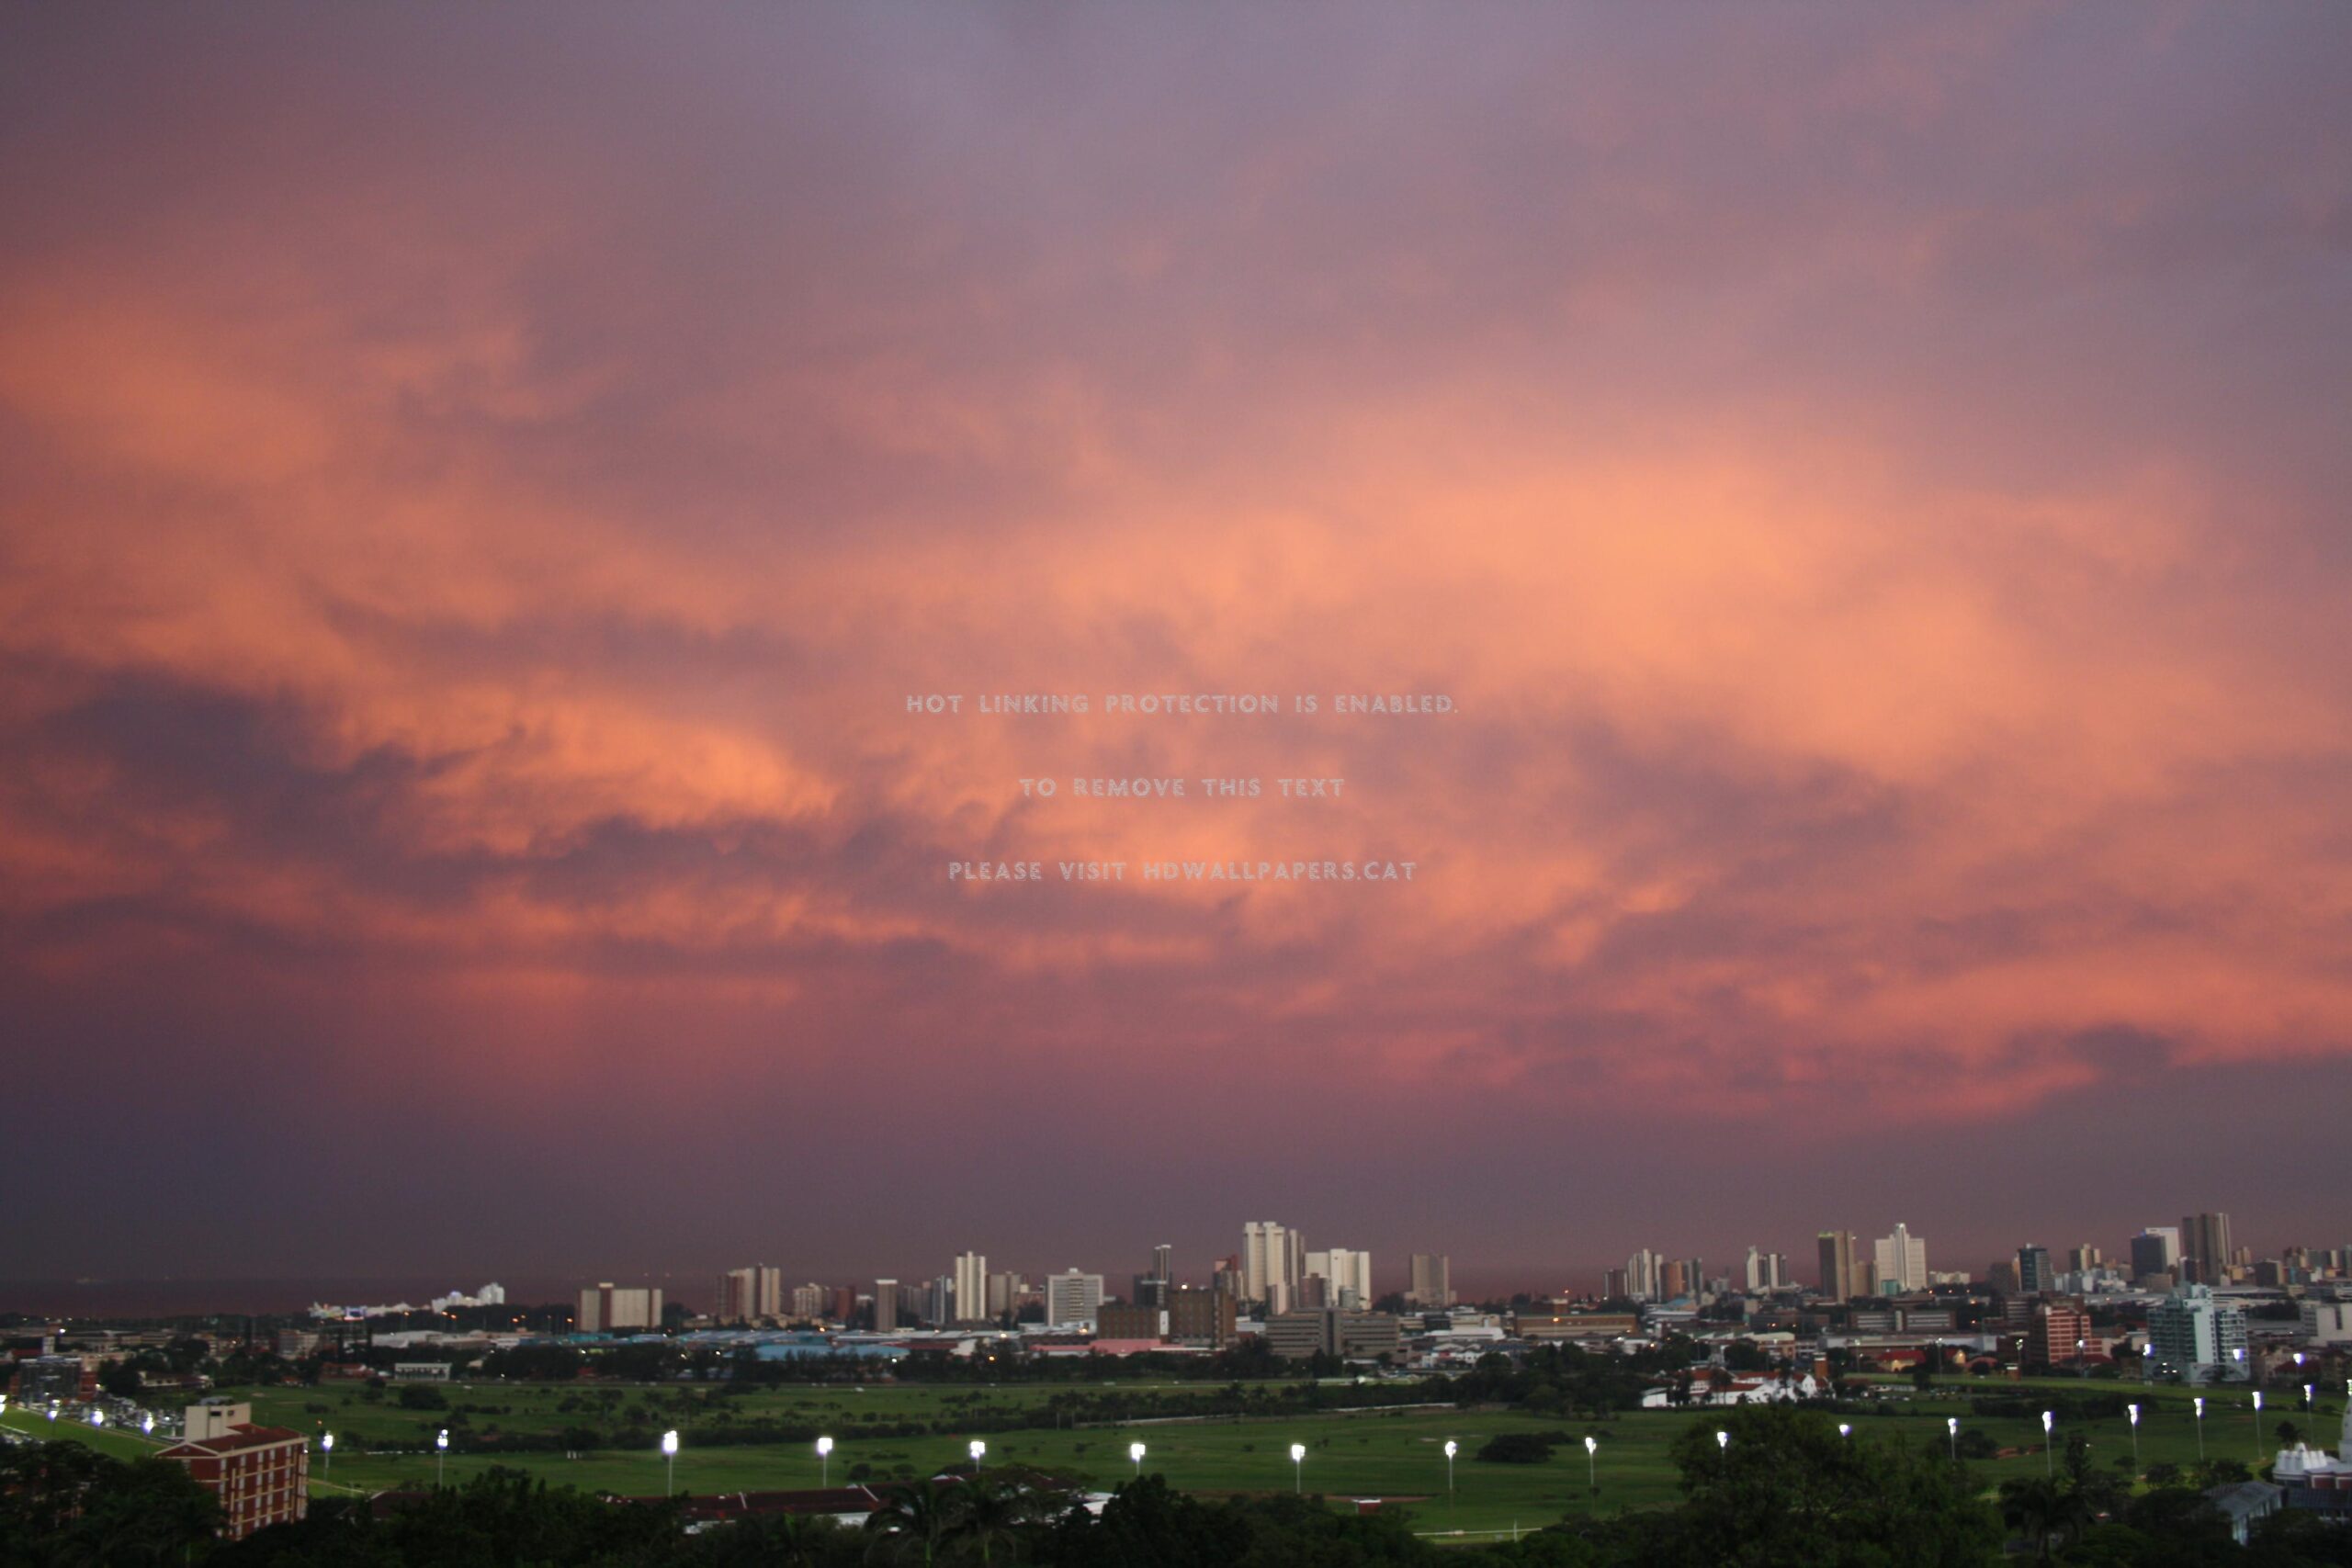 A few hours before huge storm hit durban sky